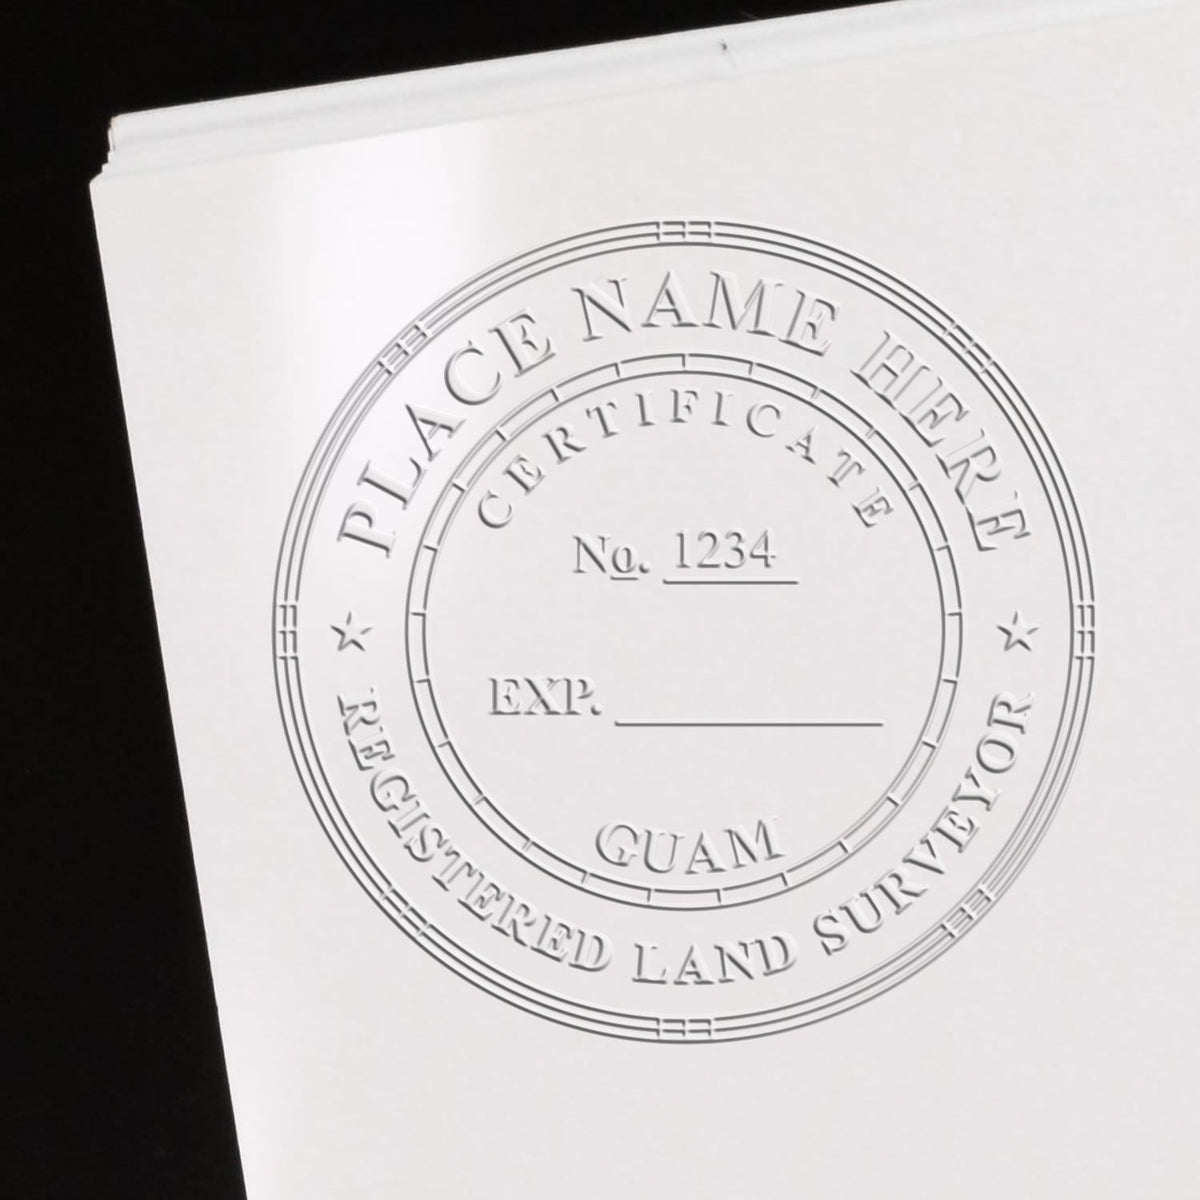 A photograph of the Hybrid Guam Land Surveyor Seal stamp impression reveals a vivid, professional image of the on paper.